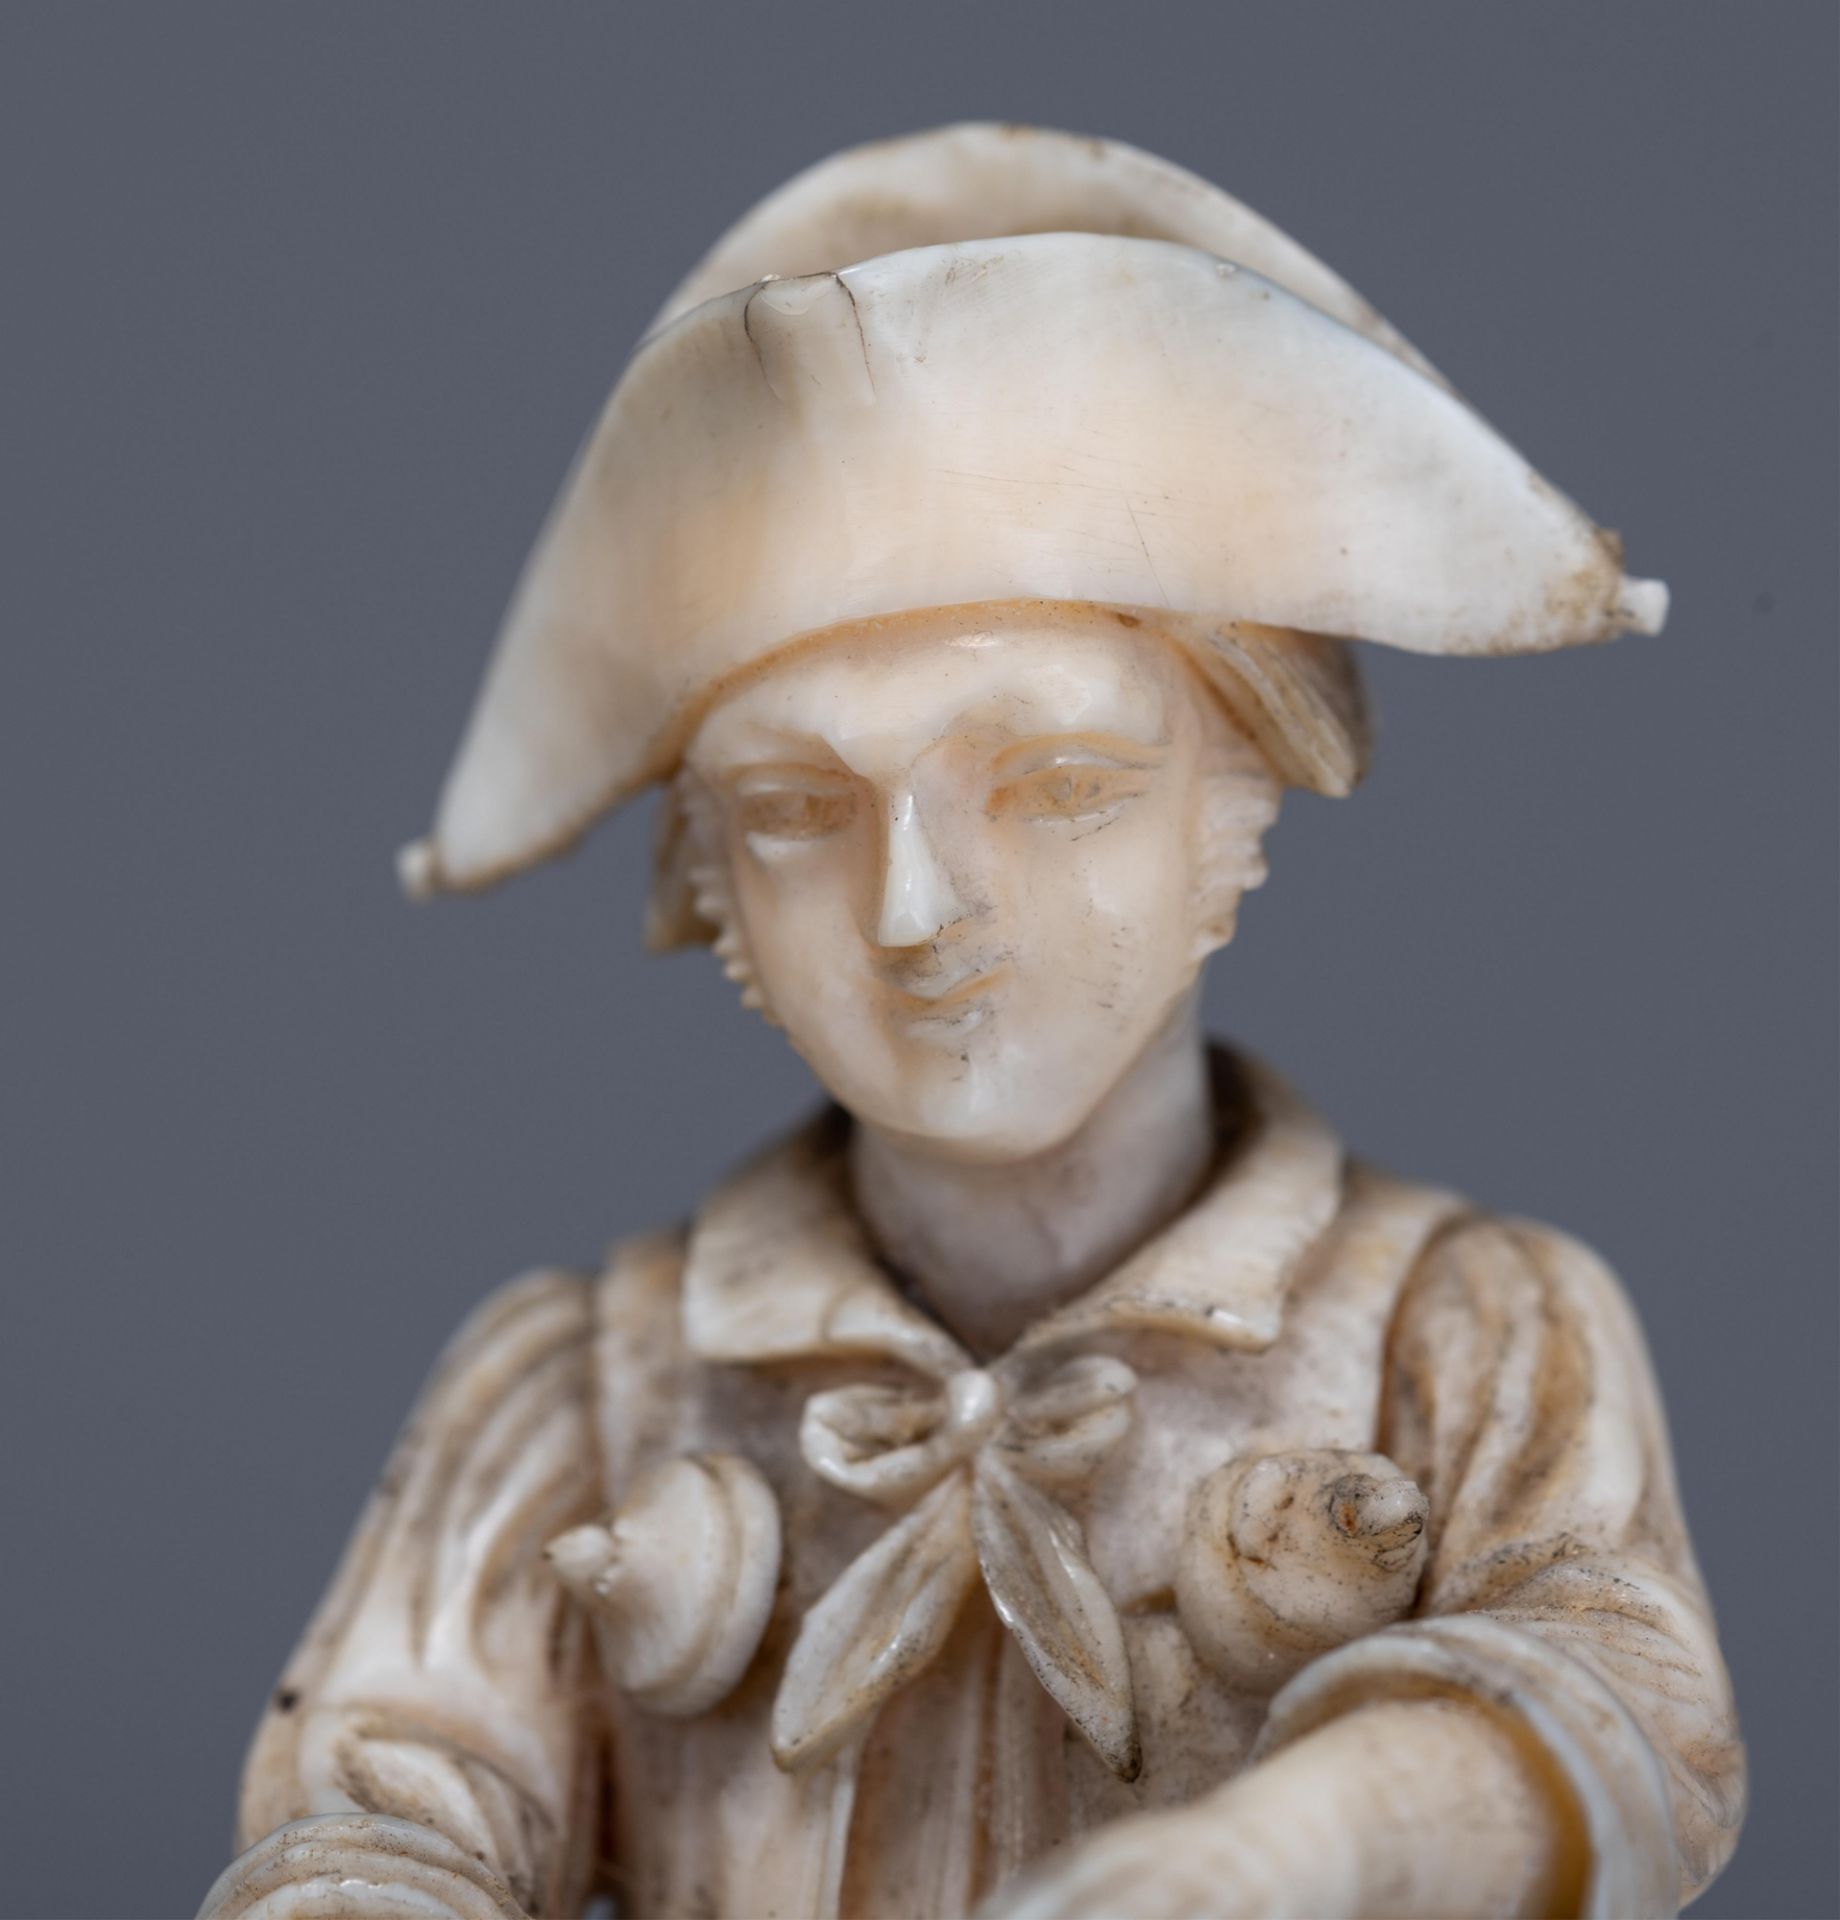 Four 19thC small Dieppe or Paris ivory figures, three on a wooden base, H 7,7 - 16,5 cm - Image 12 of 51